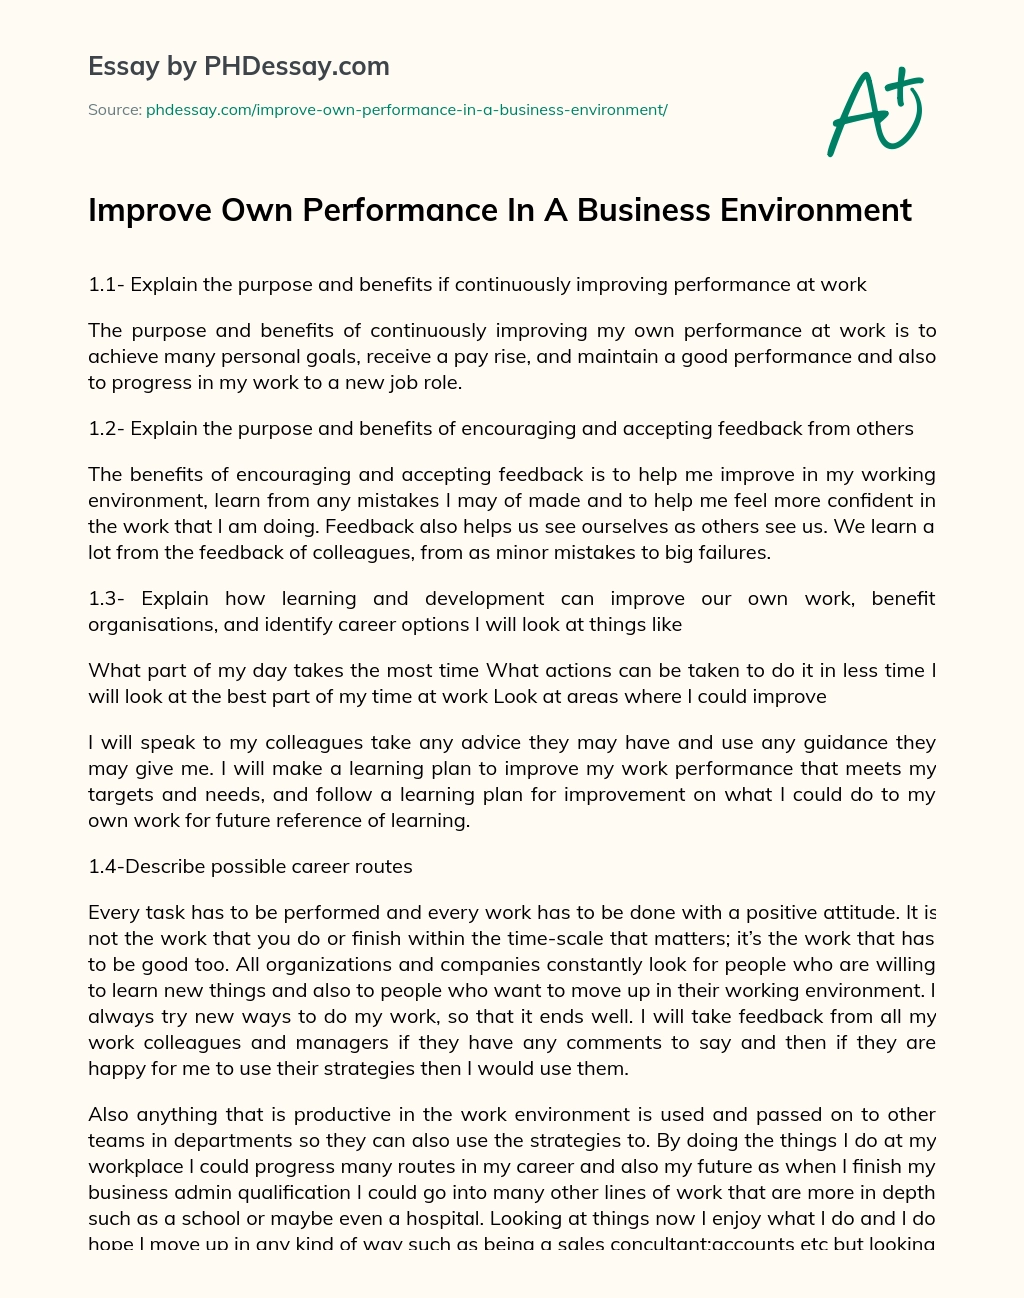 Improve Own Performance In A Business Environment Narrative Essay essay